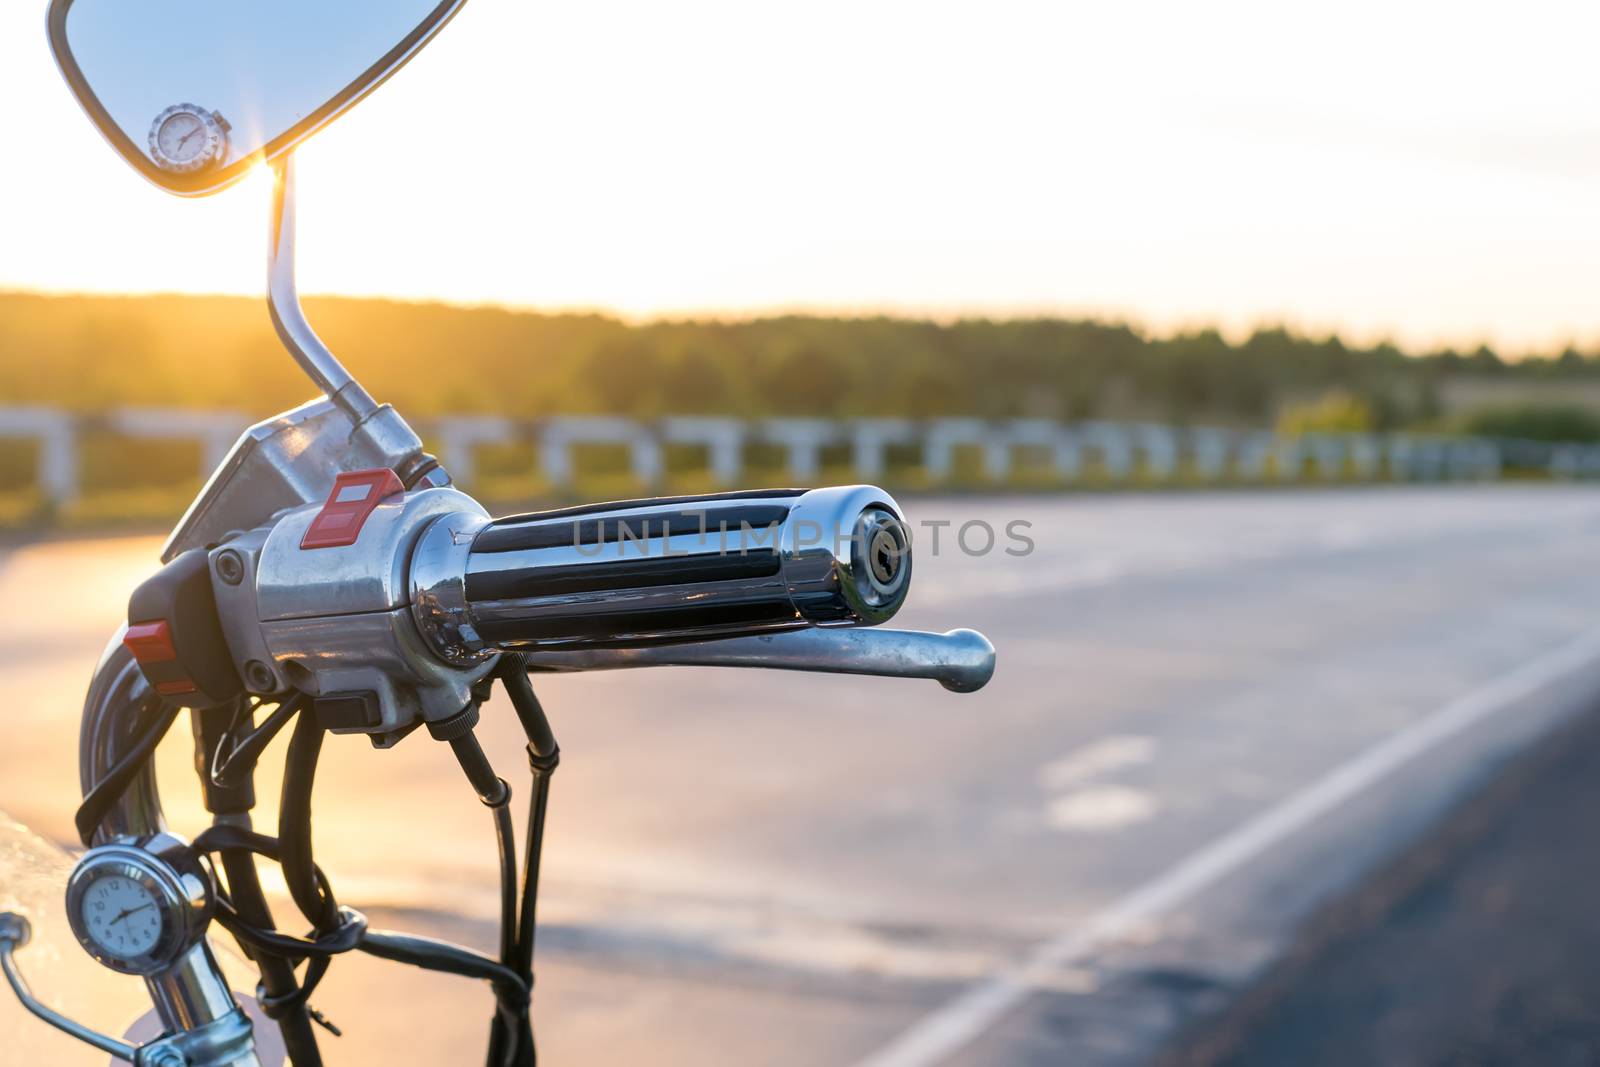 view of handlebar grips of the motorcycle on the country road background closeup by jk3030